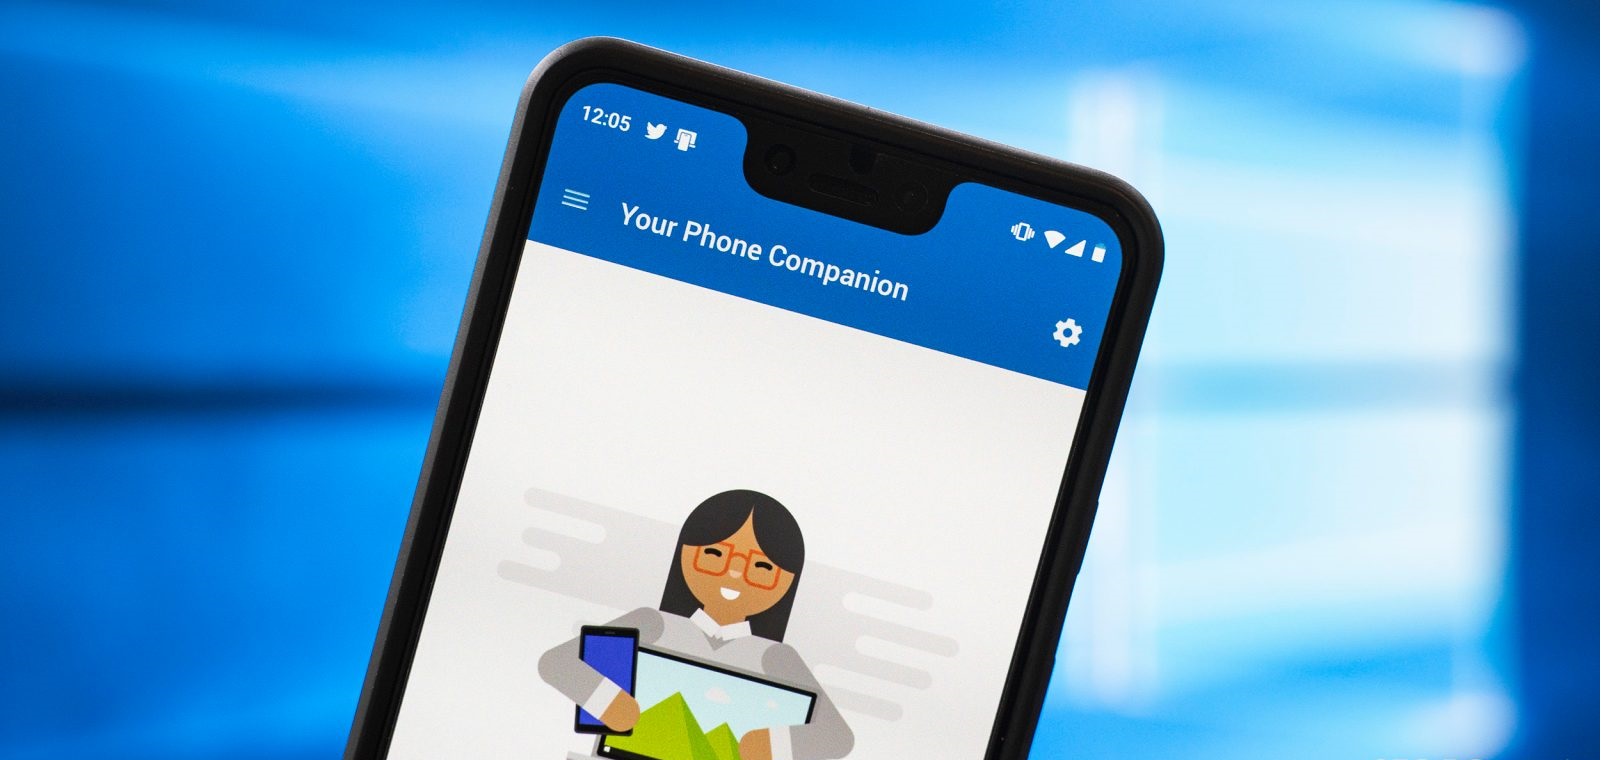 Microsoft’s Your Phone companion app hits a milestone, becomes the #1 top free app on Google Play Store